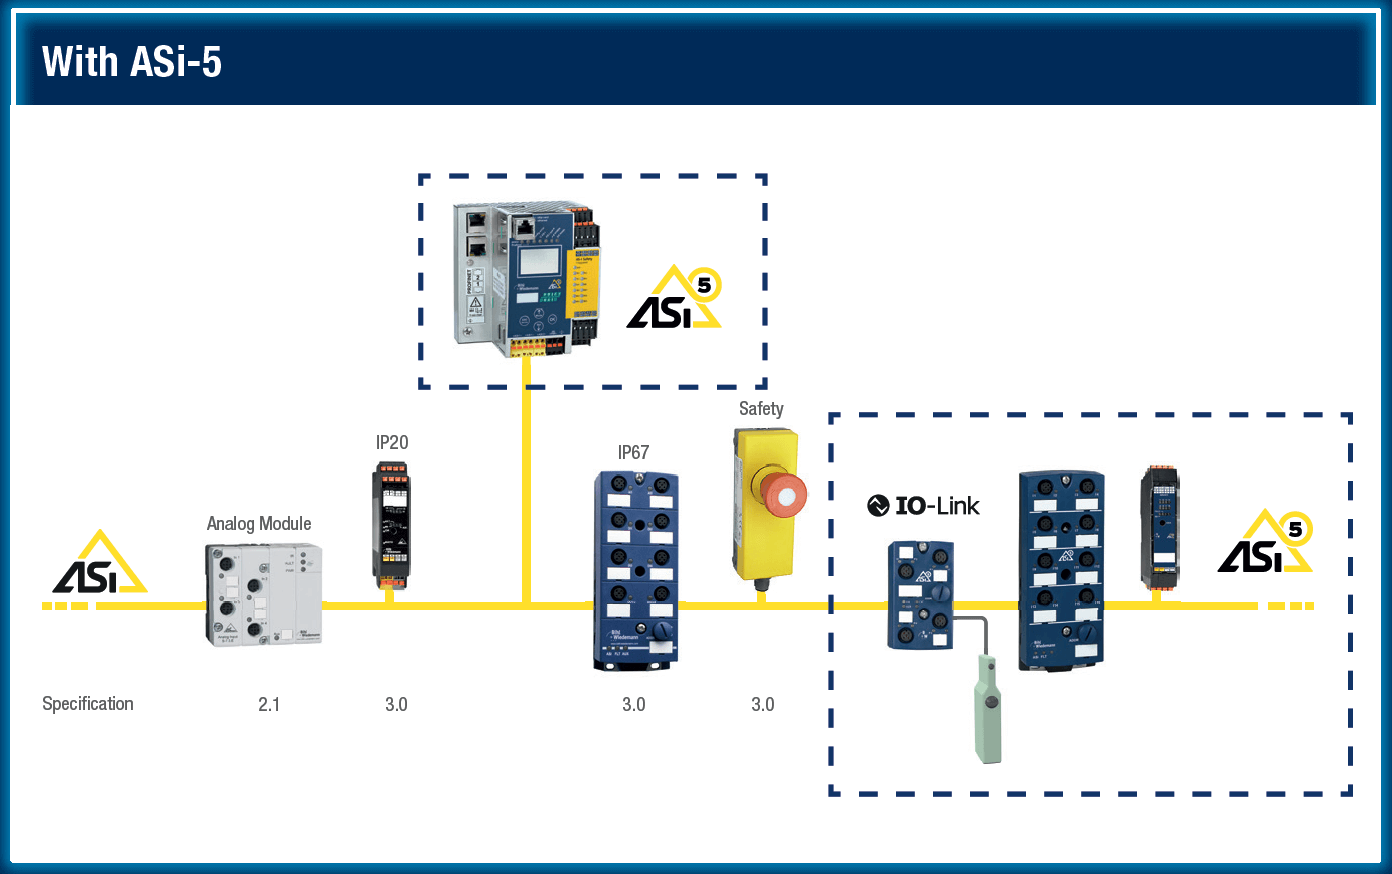 AS-i network with ASi-5